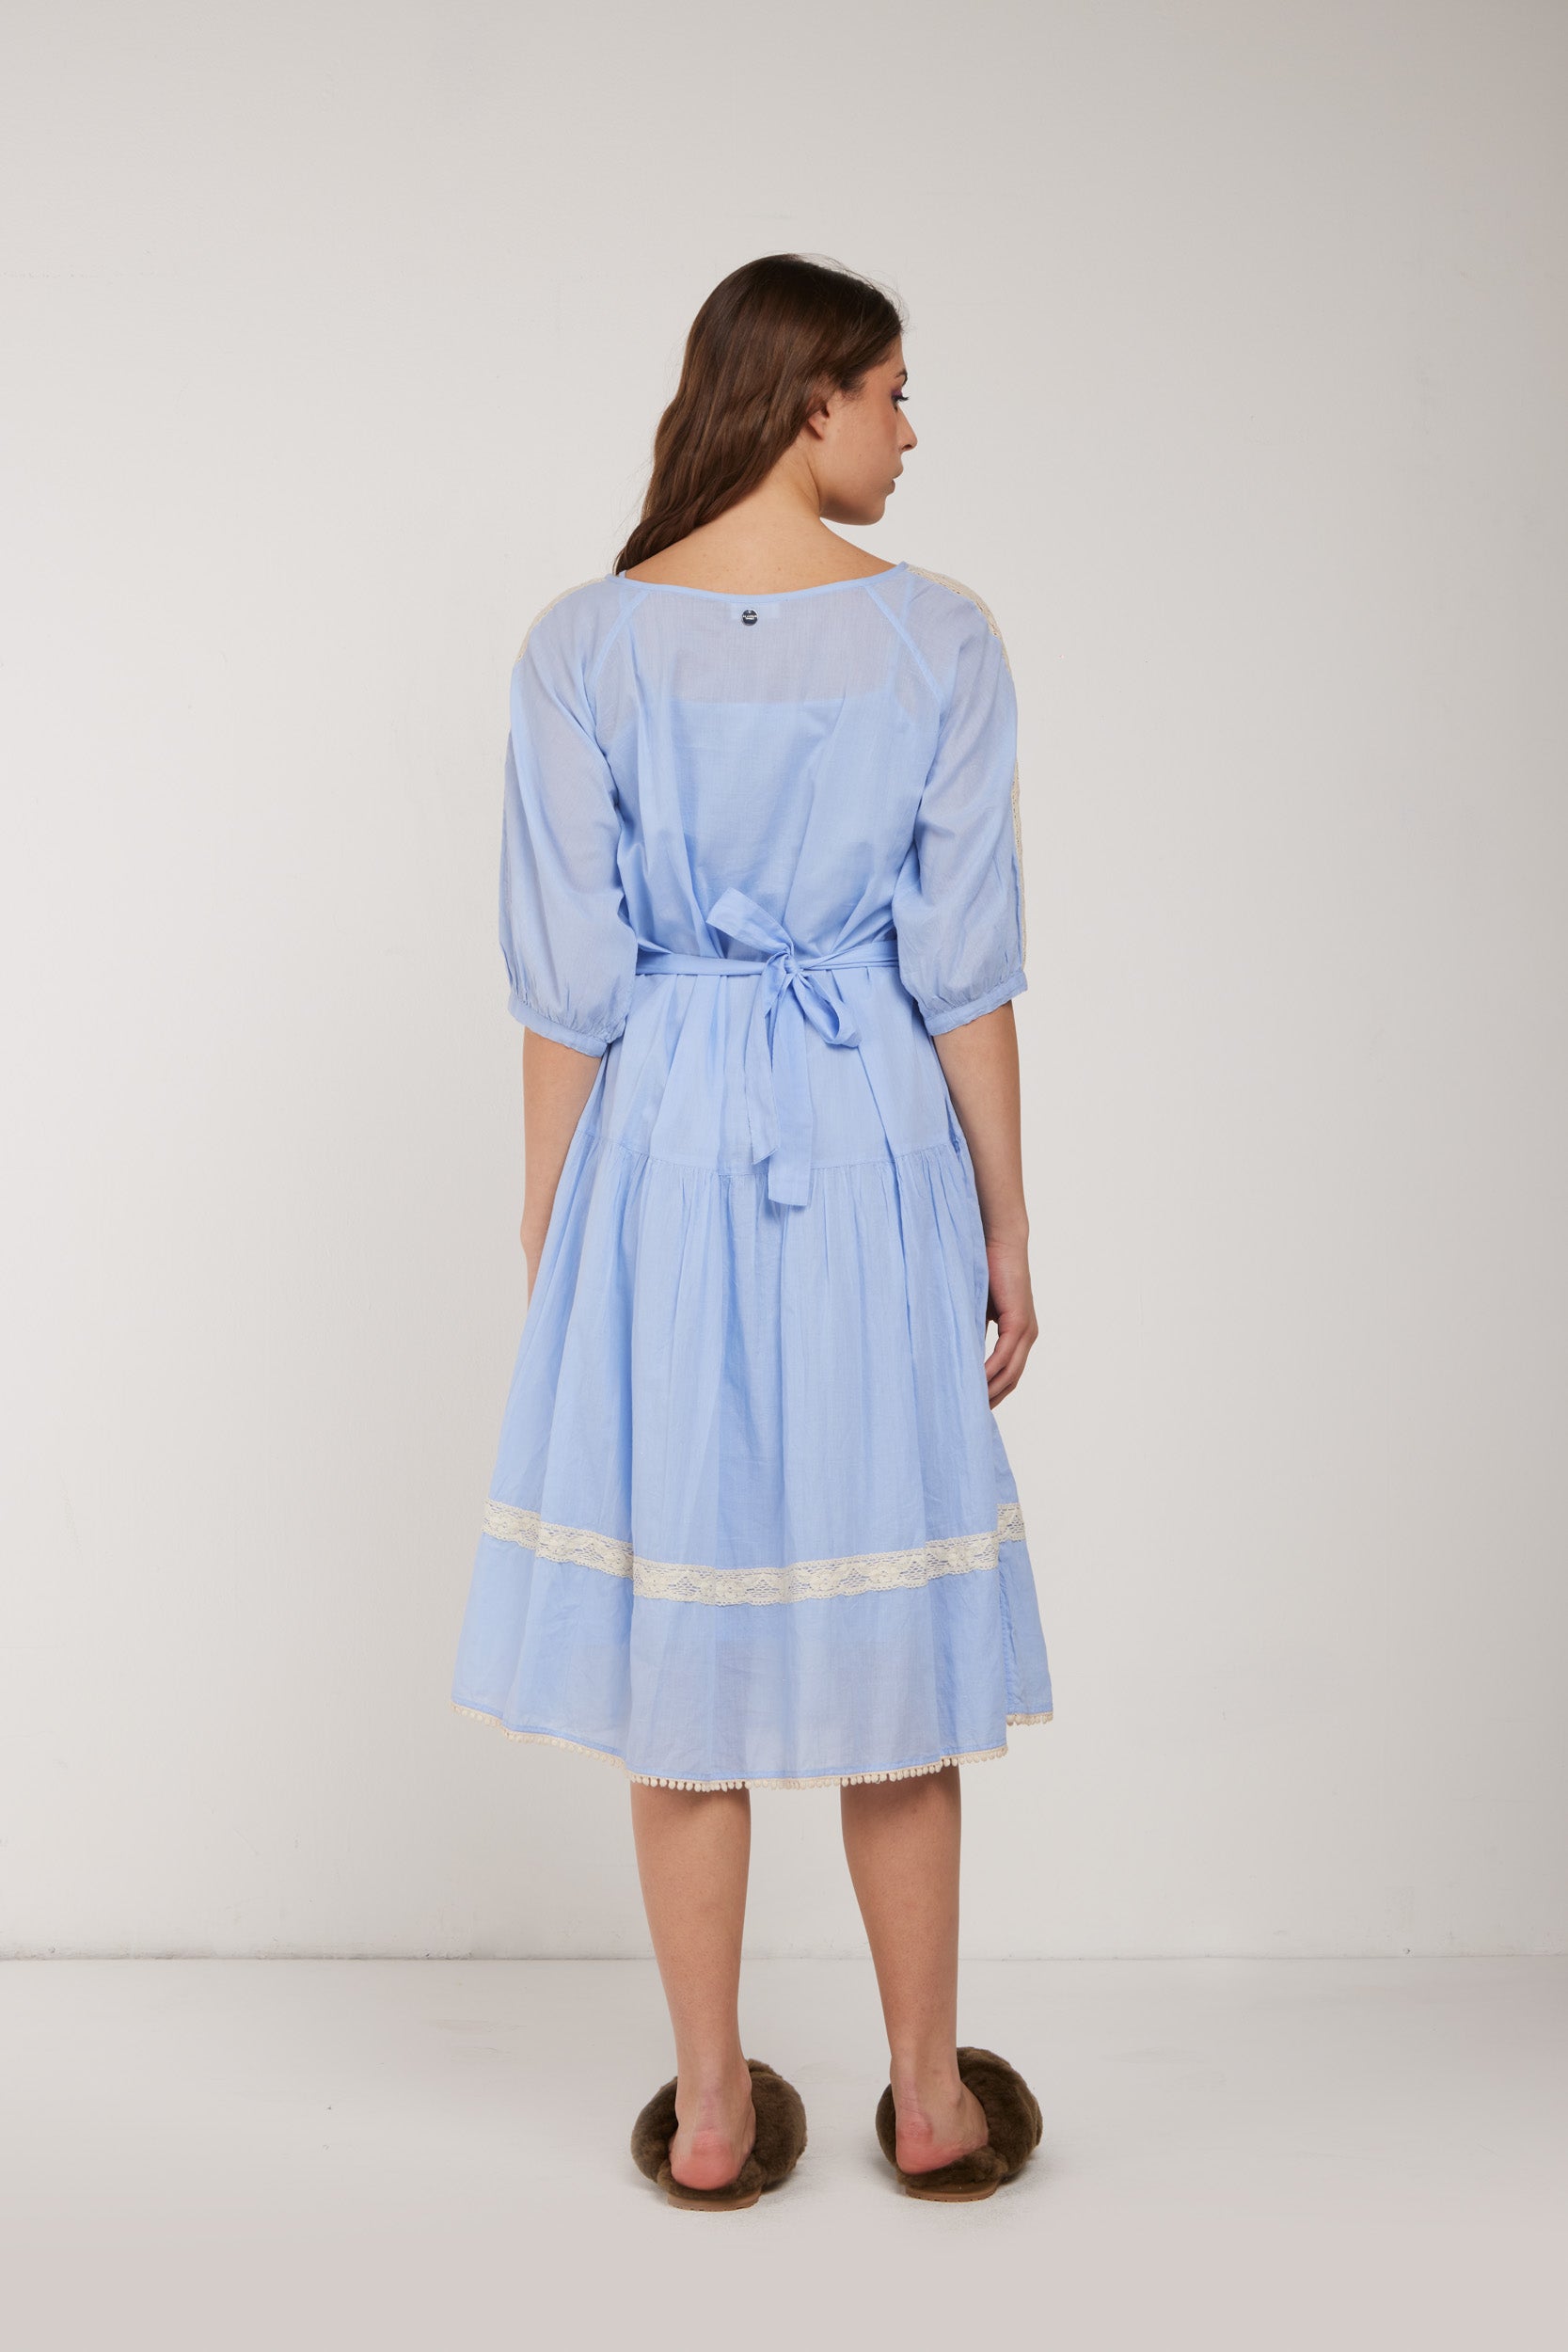 TWINSET Light Blue and Lace Chemisier Dress